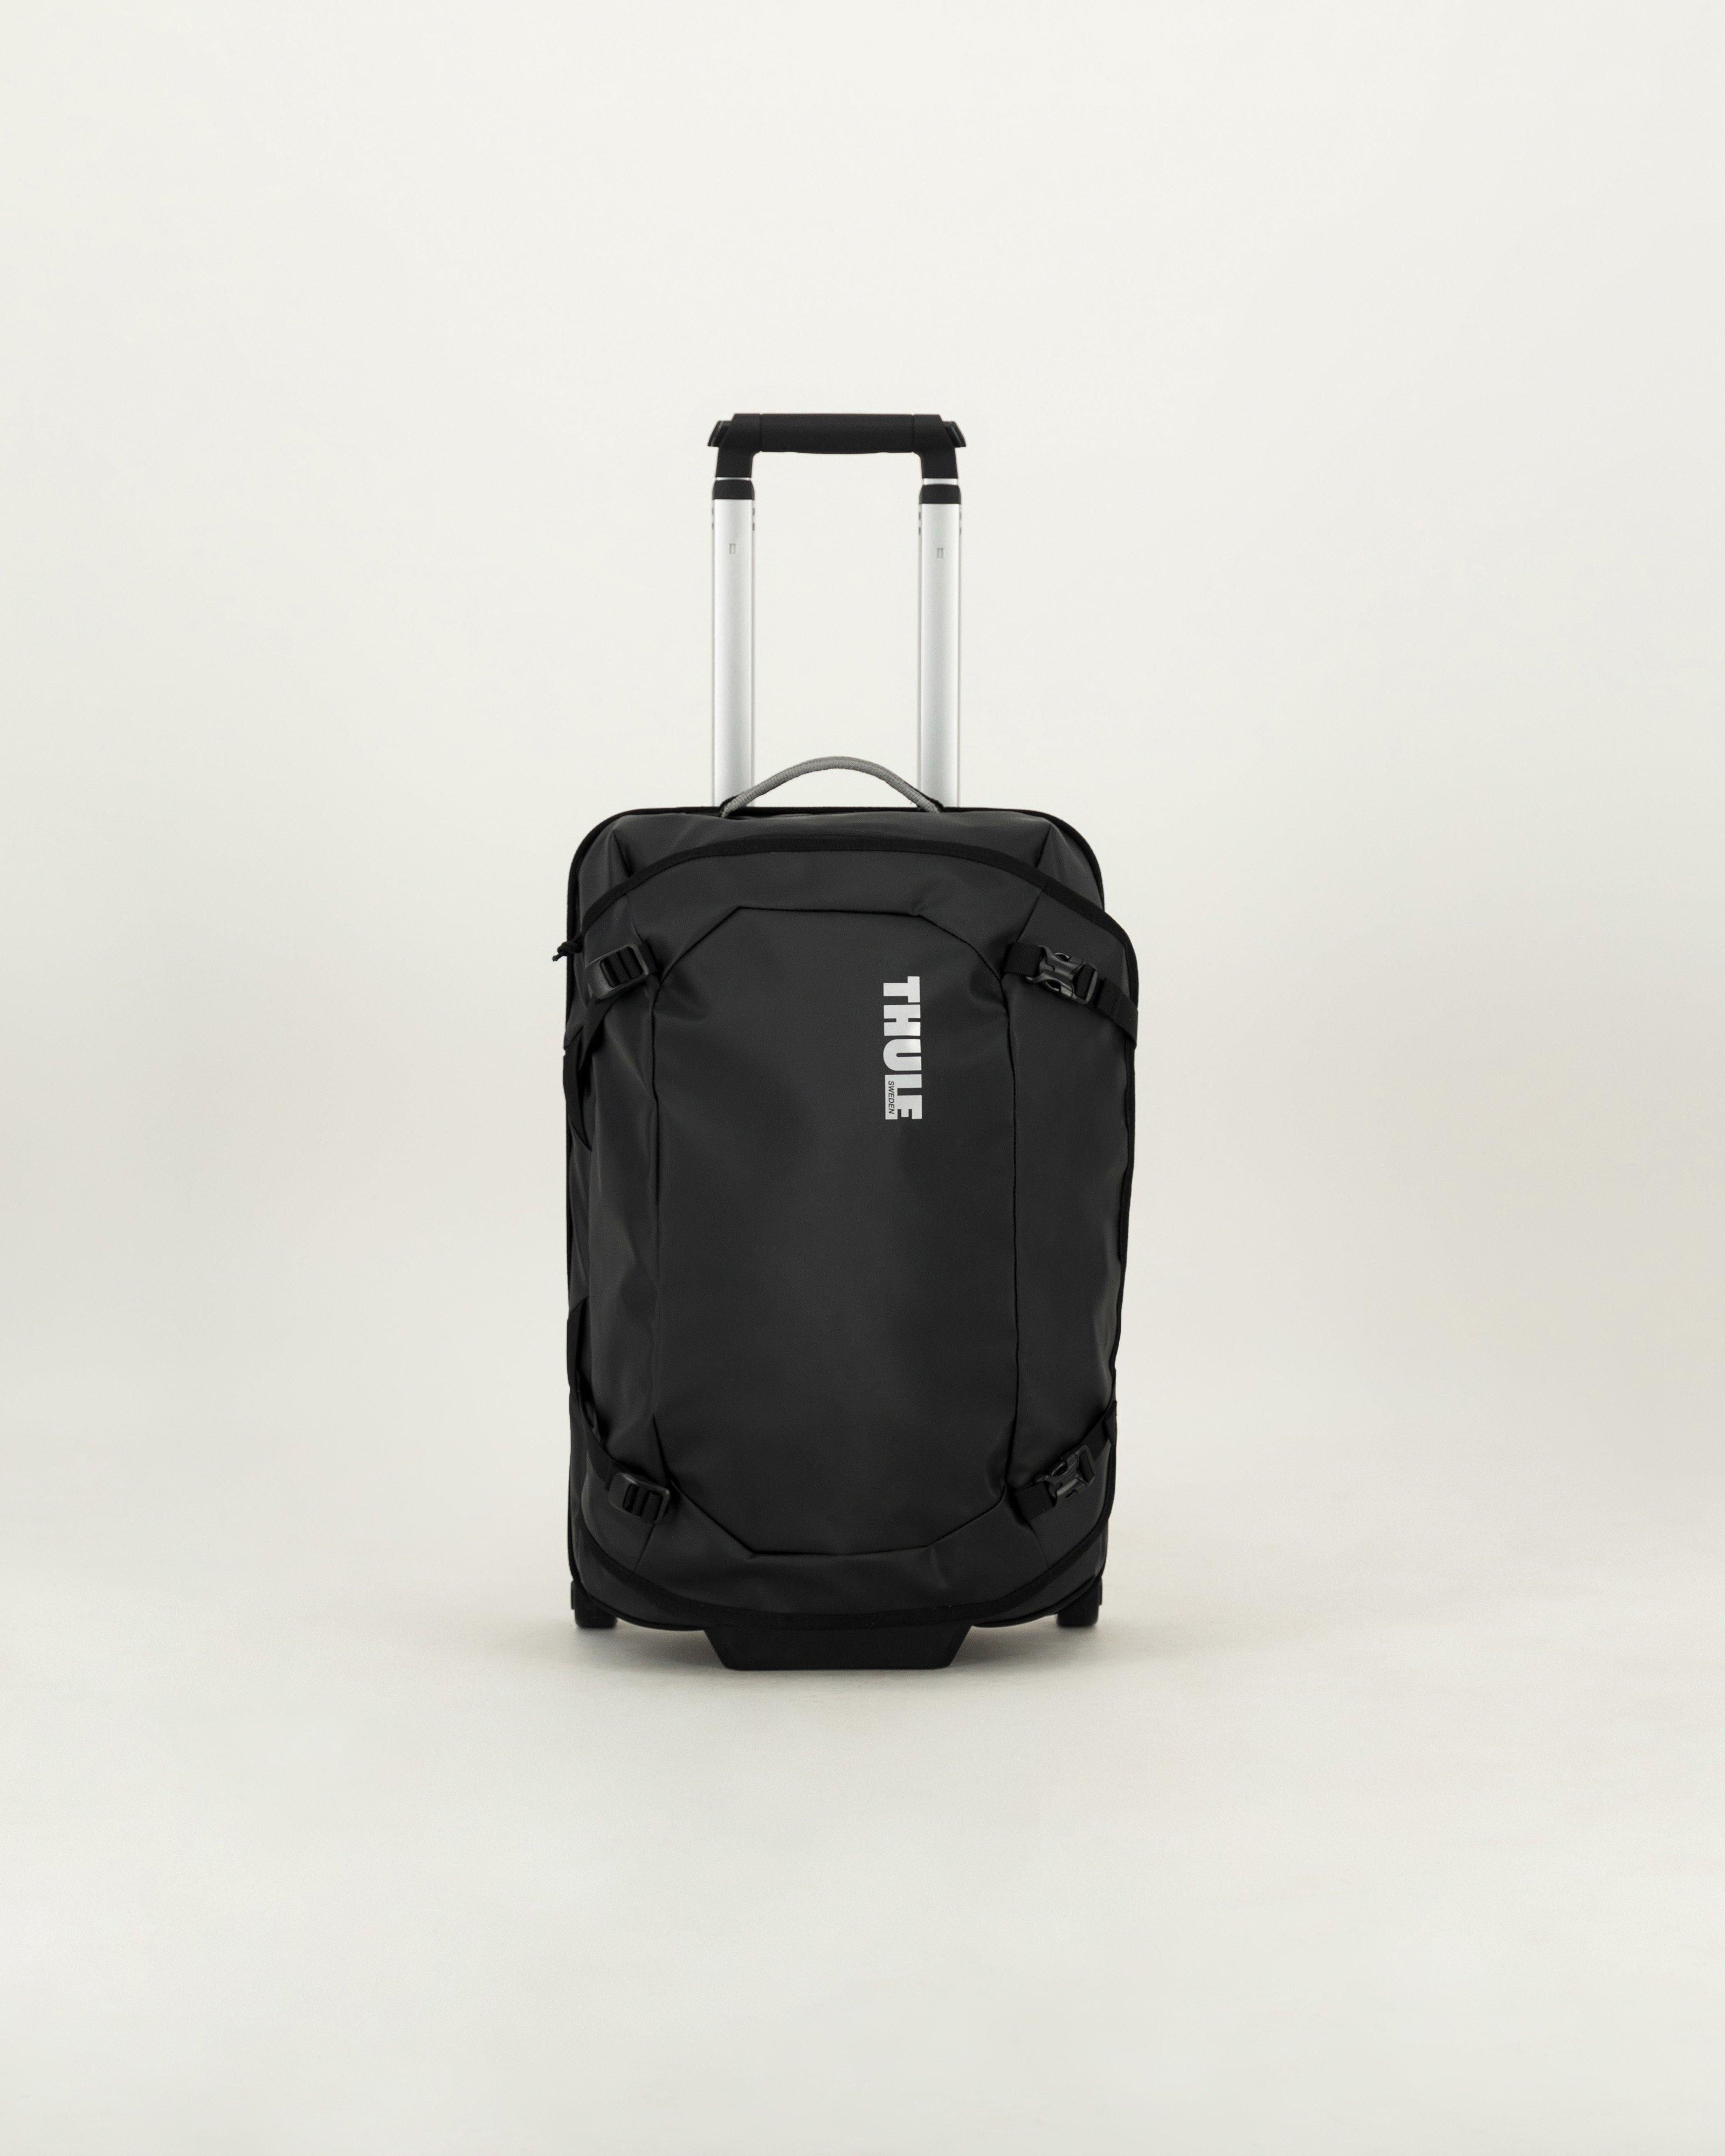 Thule Chasm Carry-On 40L Luggage Roller Bag -  Black